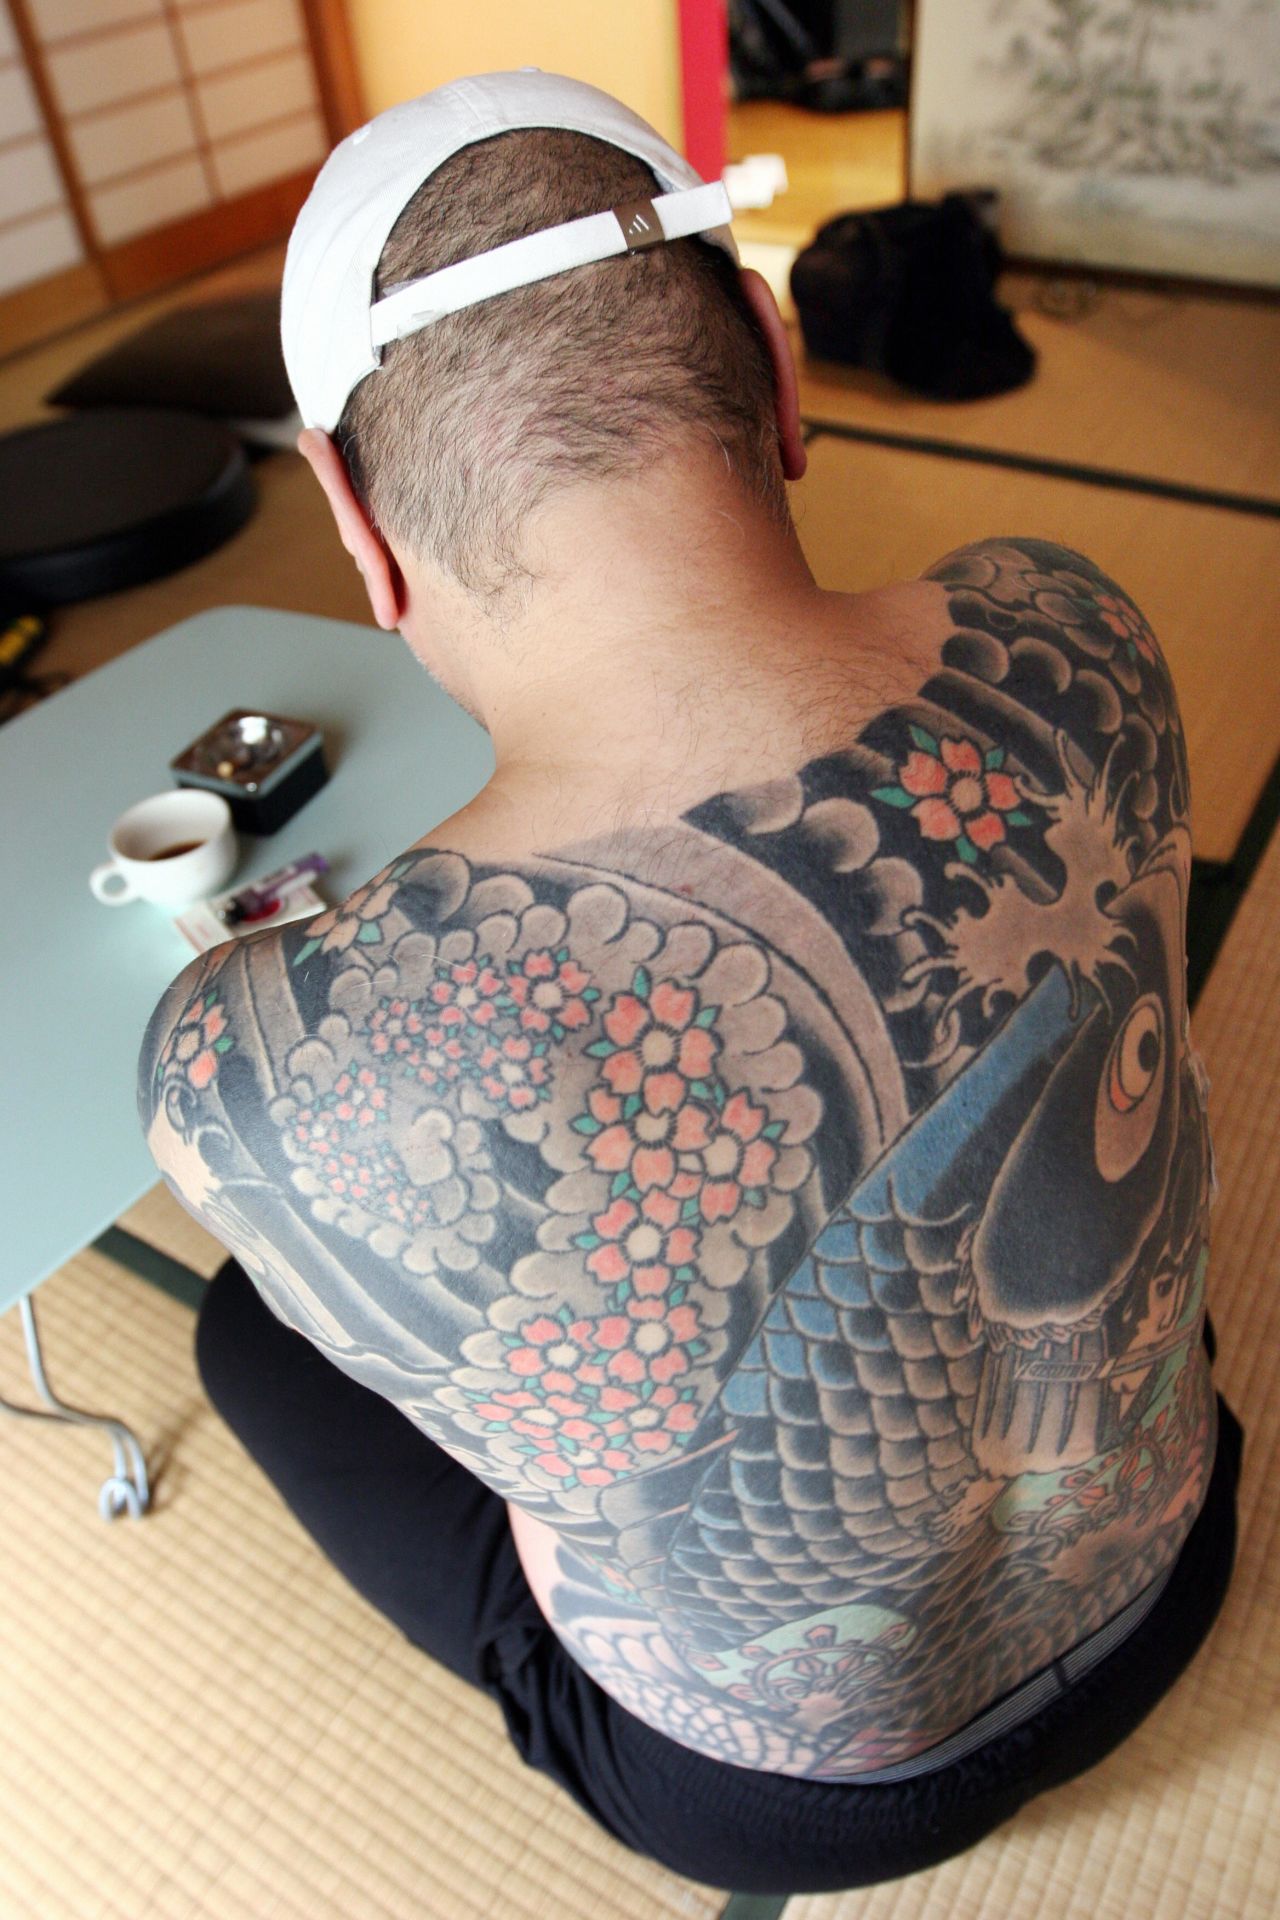 A retired yakuza boss, who does not wish to be identified, is pictured at his residence in Tokyo in 2009. His tattoo on his back features a carp swimming upstream against a waterfall.